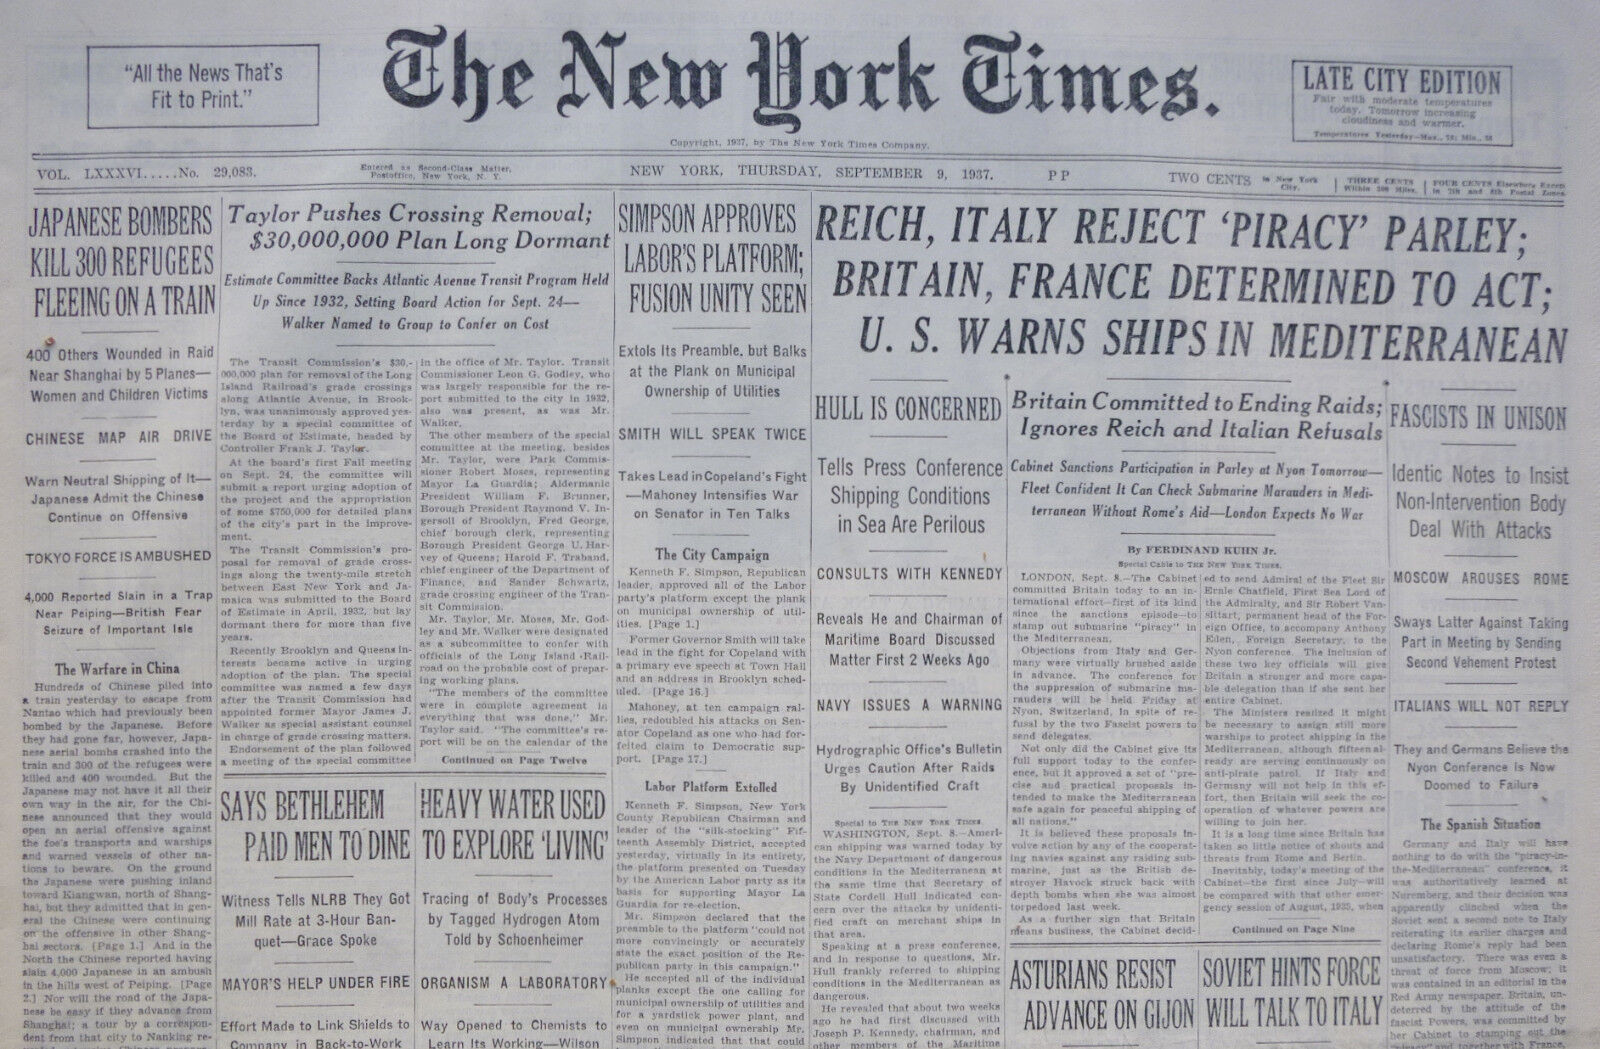 9-1937 September 9 REICH ITALY REJECT \'PIRACY\' PARLEY; BRITAIN FRANCE DETERMINED